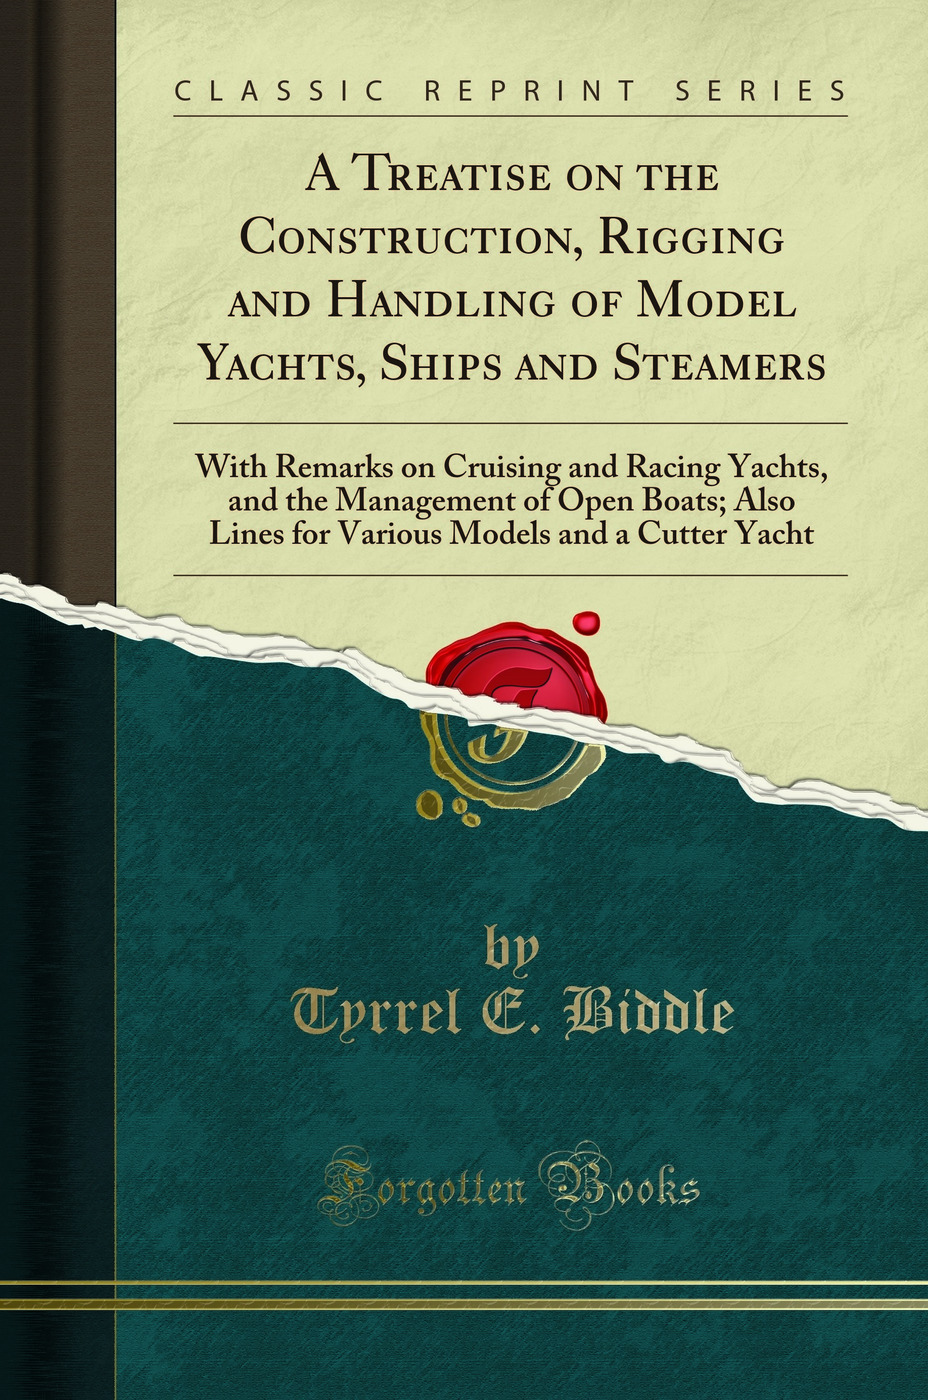 A Treatise on the Construction, Rigging and Handling of Model Yachts, Ships and - Tyrrel E. Biddle